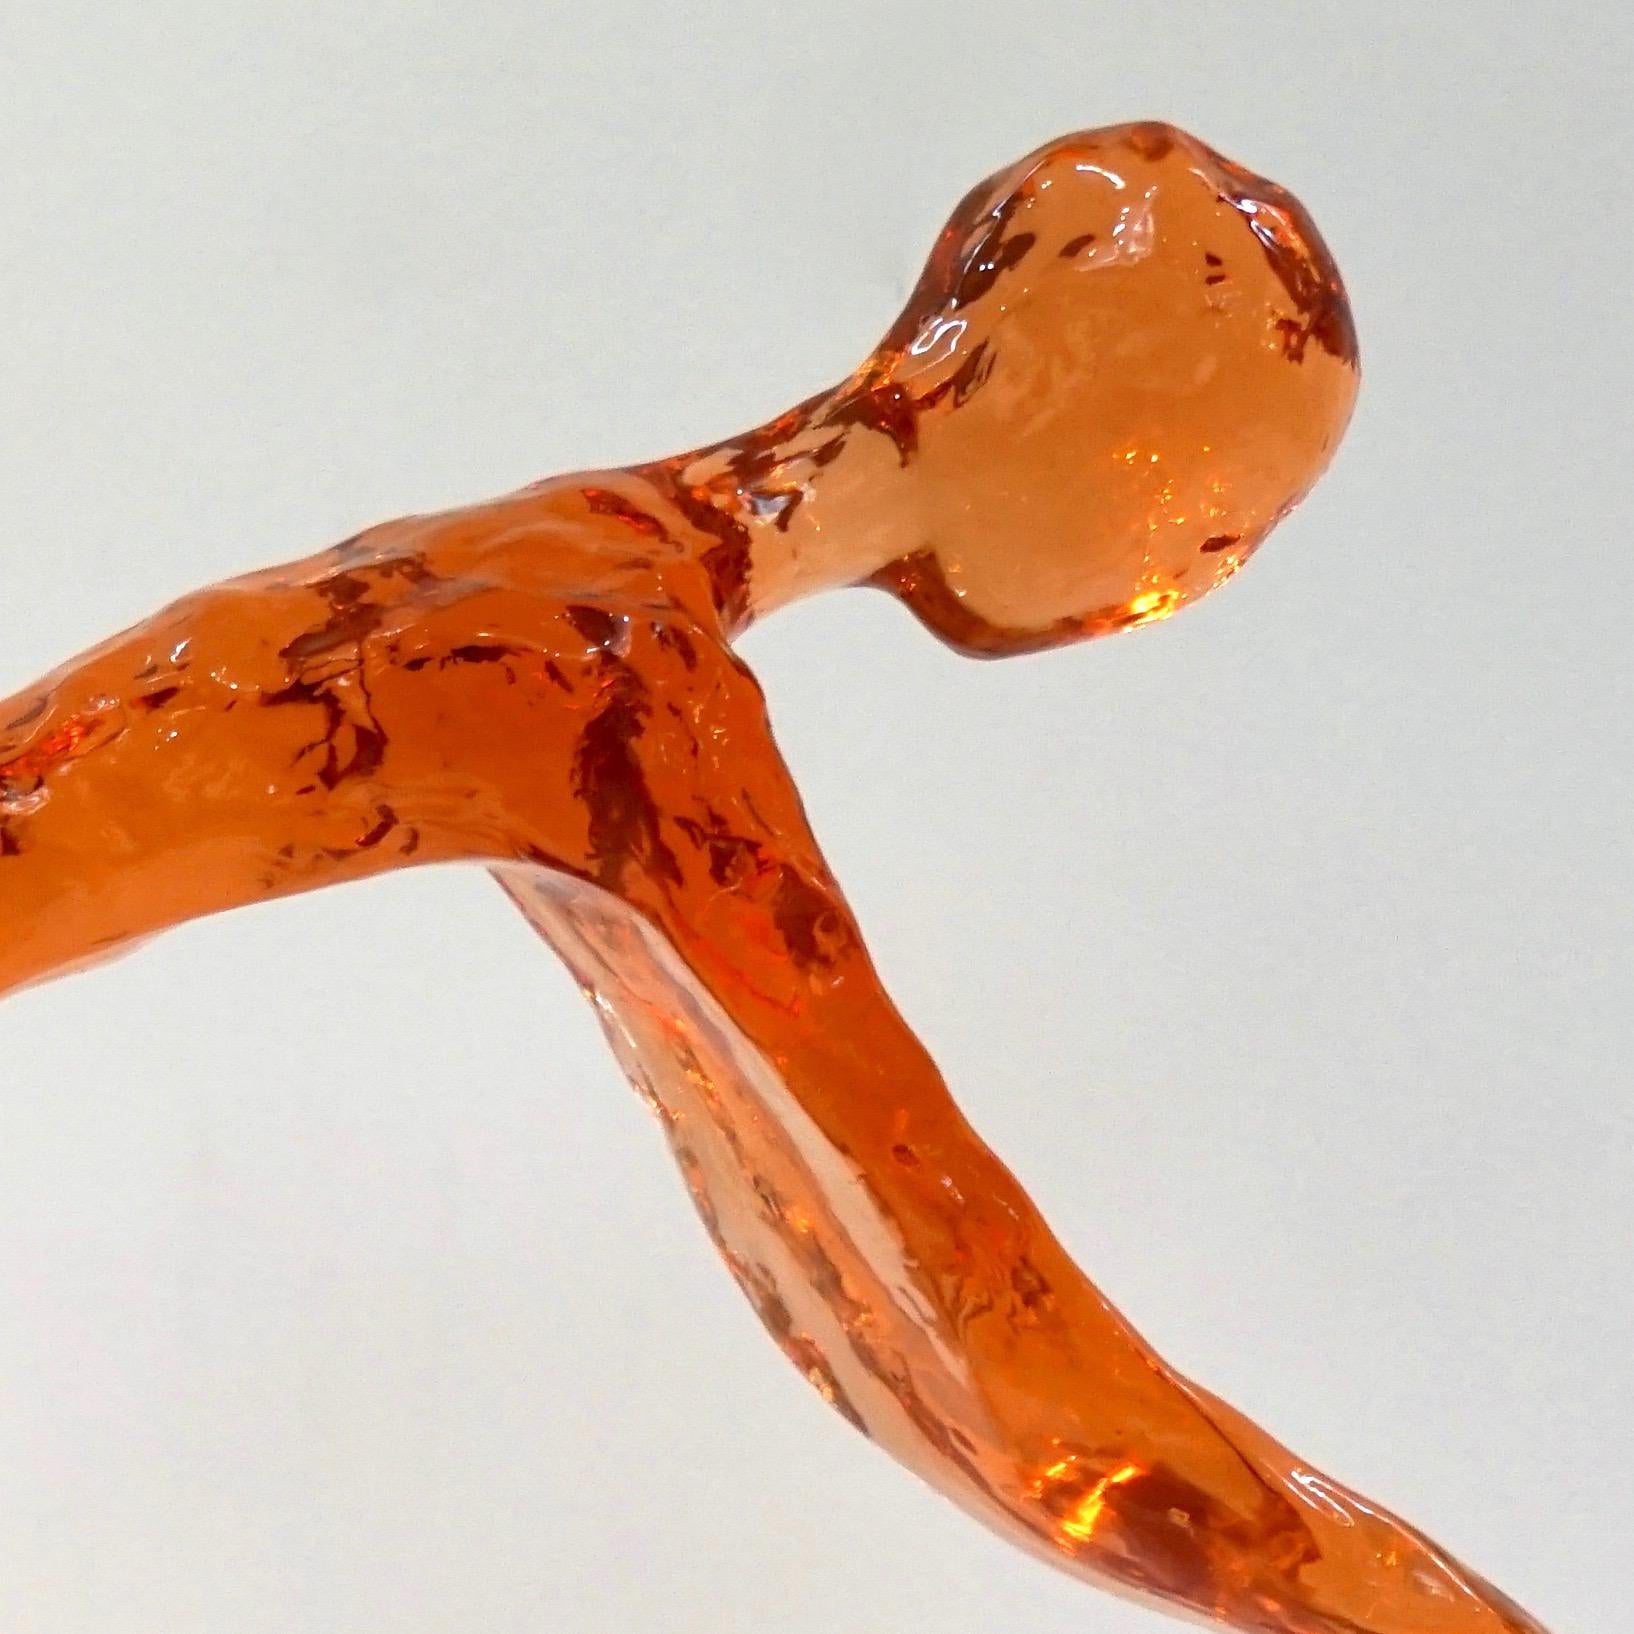 Organic Minimalist biker on a bicycle, made in the USA in high-quality lucent pastel orange color acrylic, with a sophisticated textured finish that makes it look like a glasswork of Art, exclusively handcrafted and curated by a small Art Studio